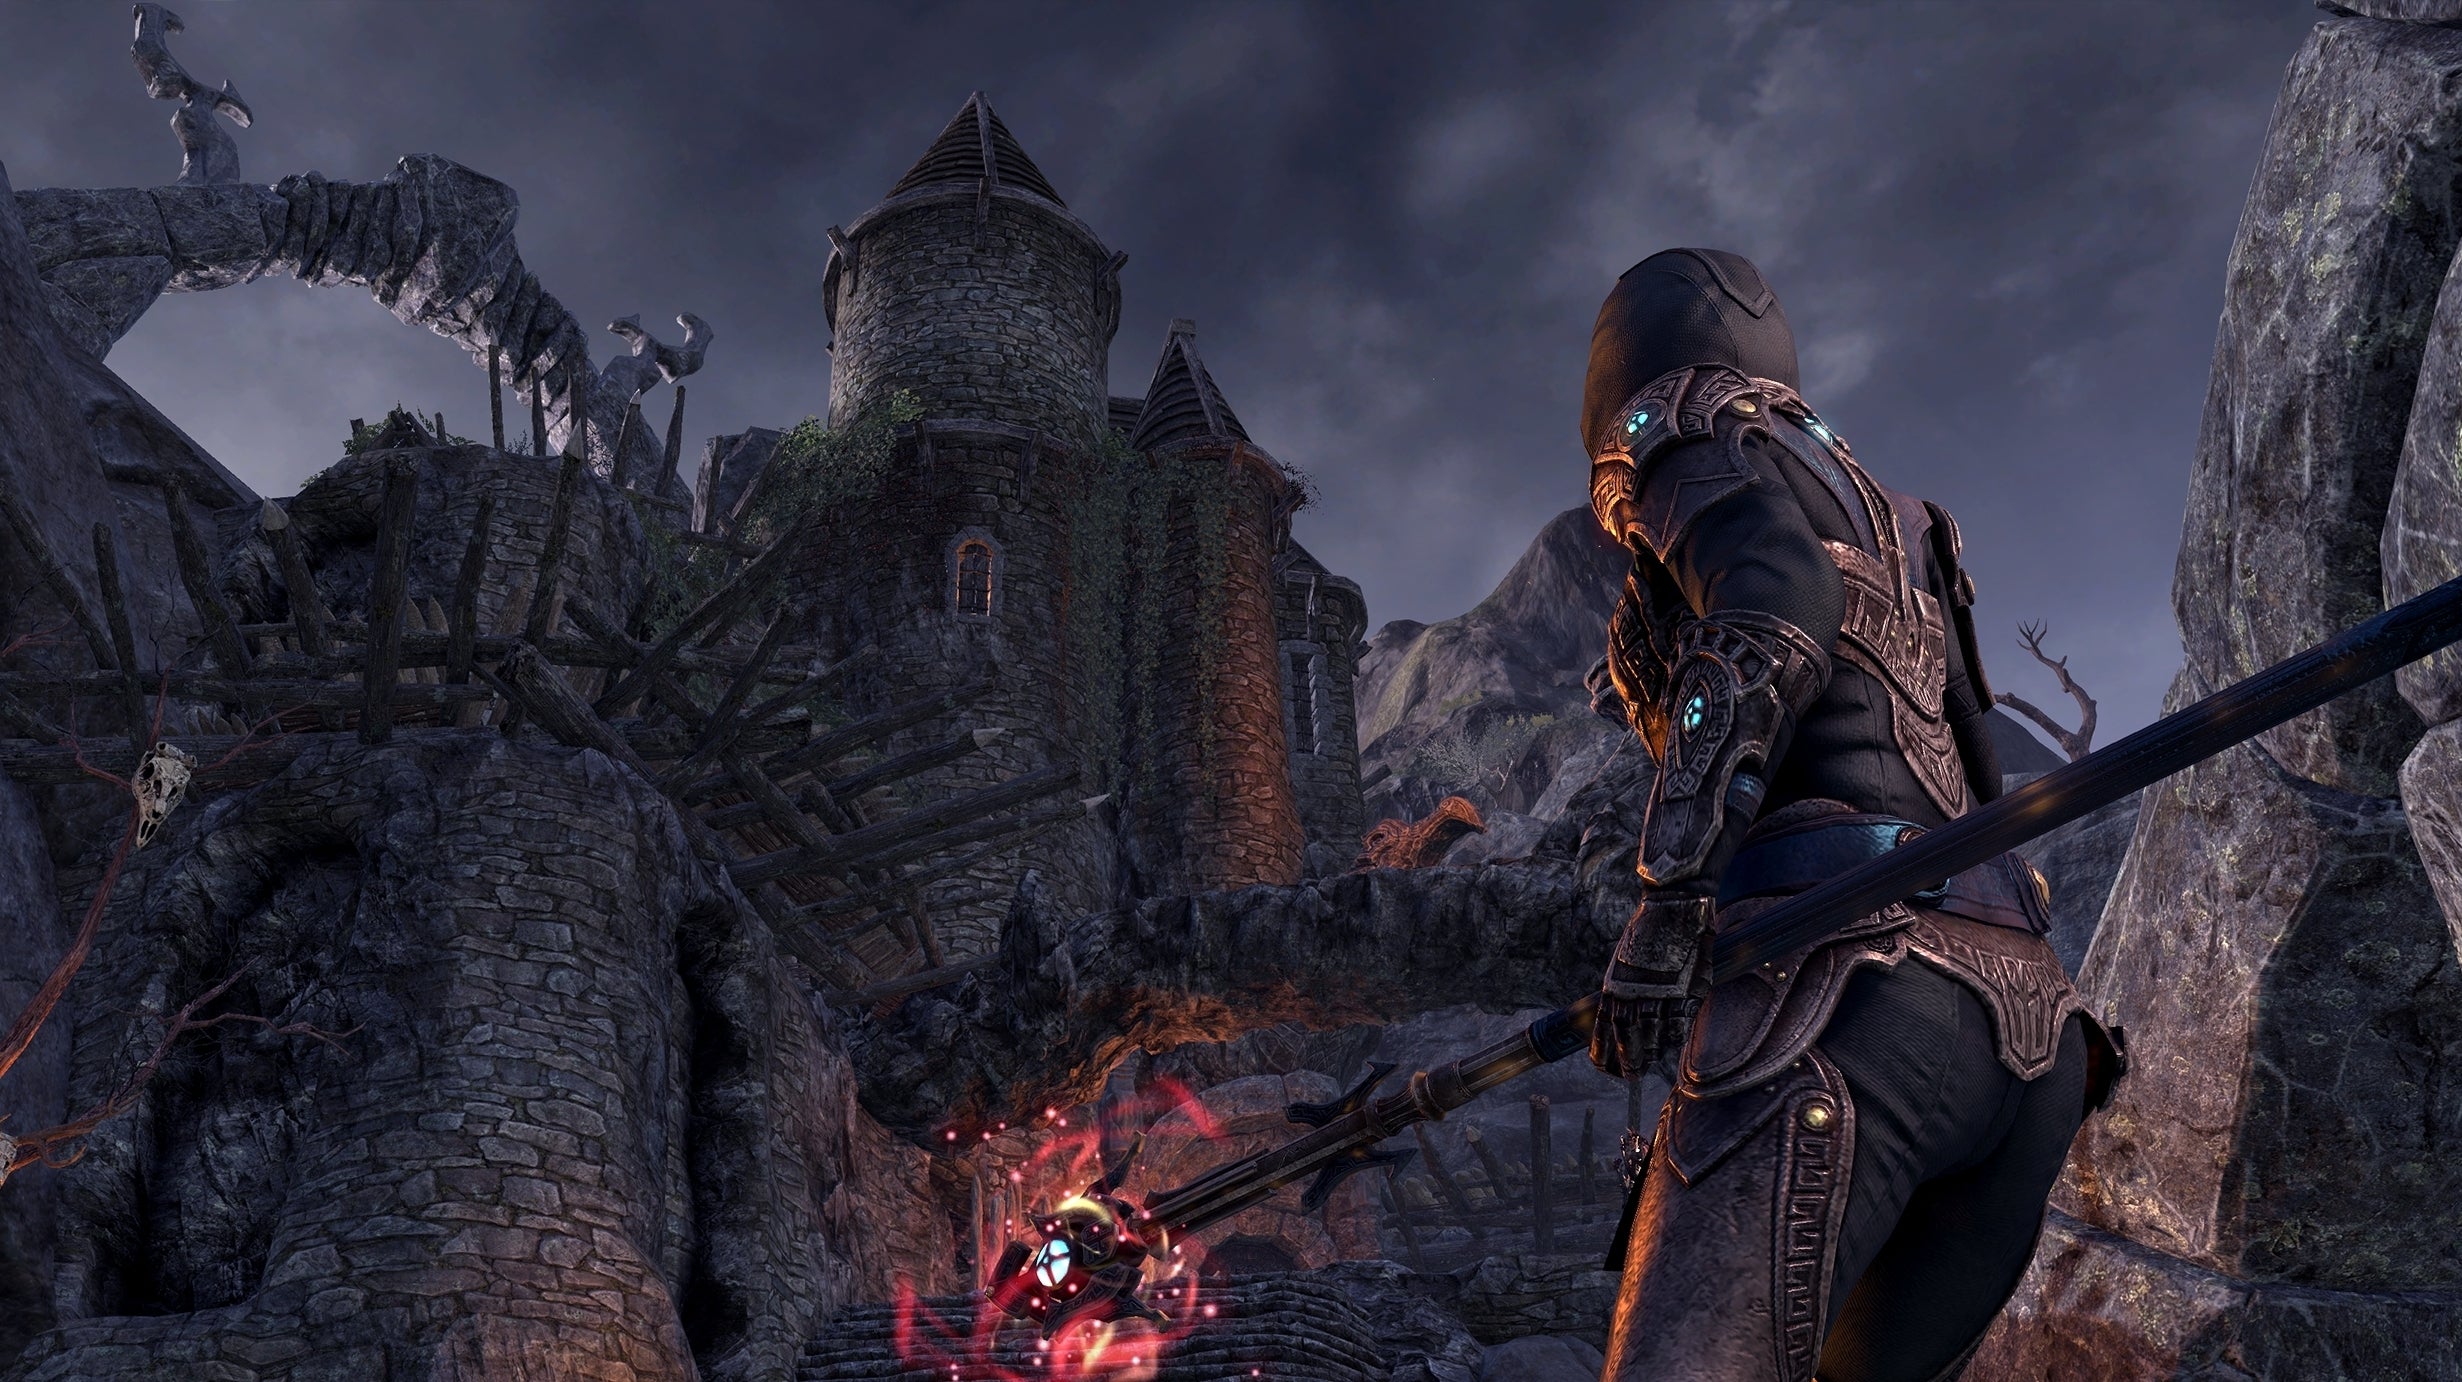 Image for The Elder Scrolls Online's new DLC, Markarth, boasts a "dangerous new zone" and "powerful, hidden secrets"